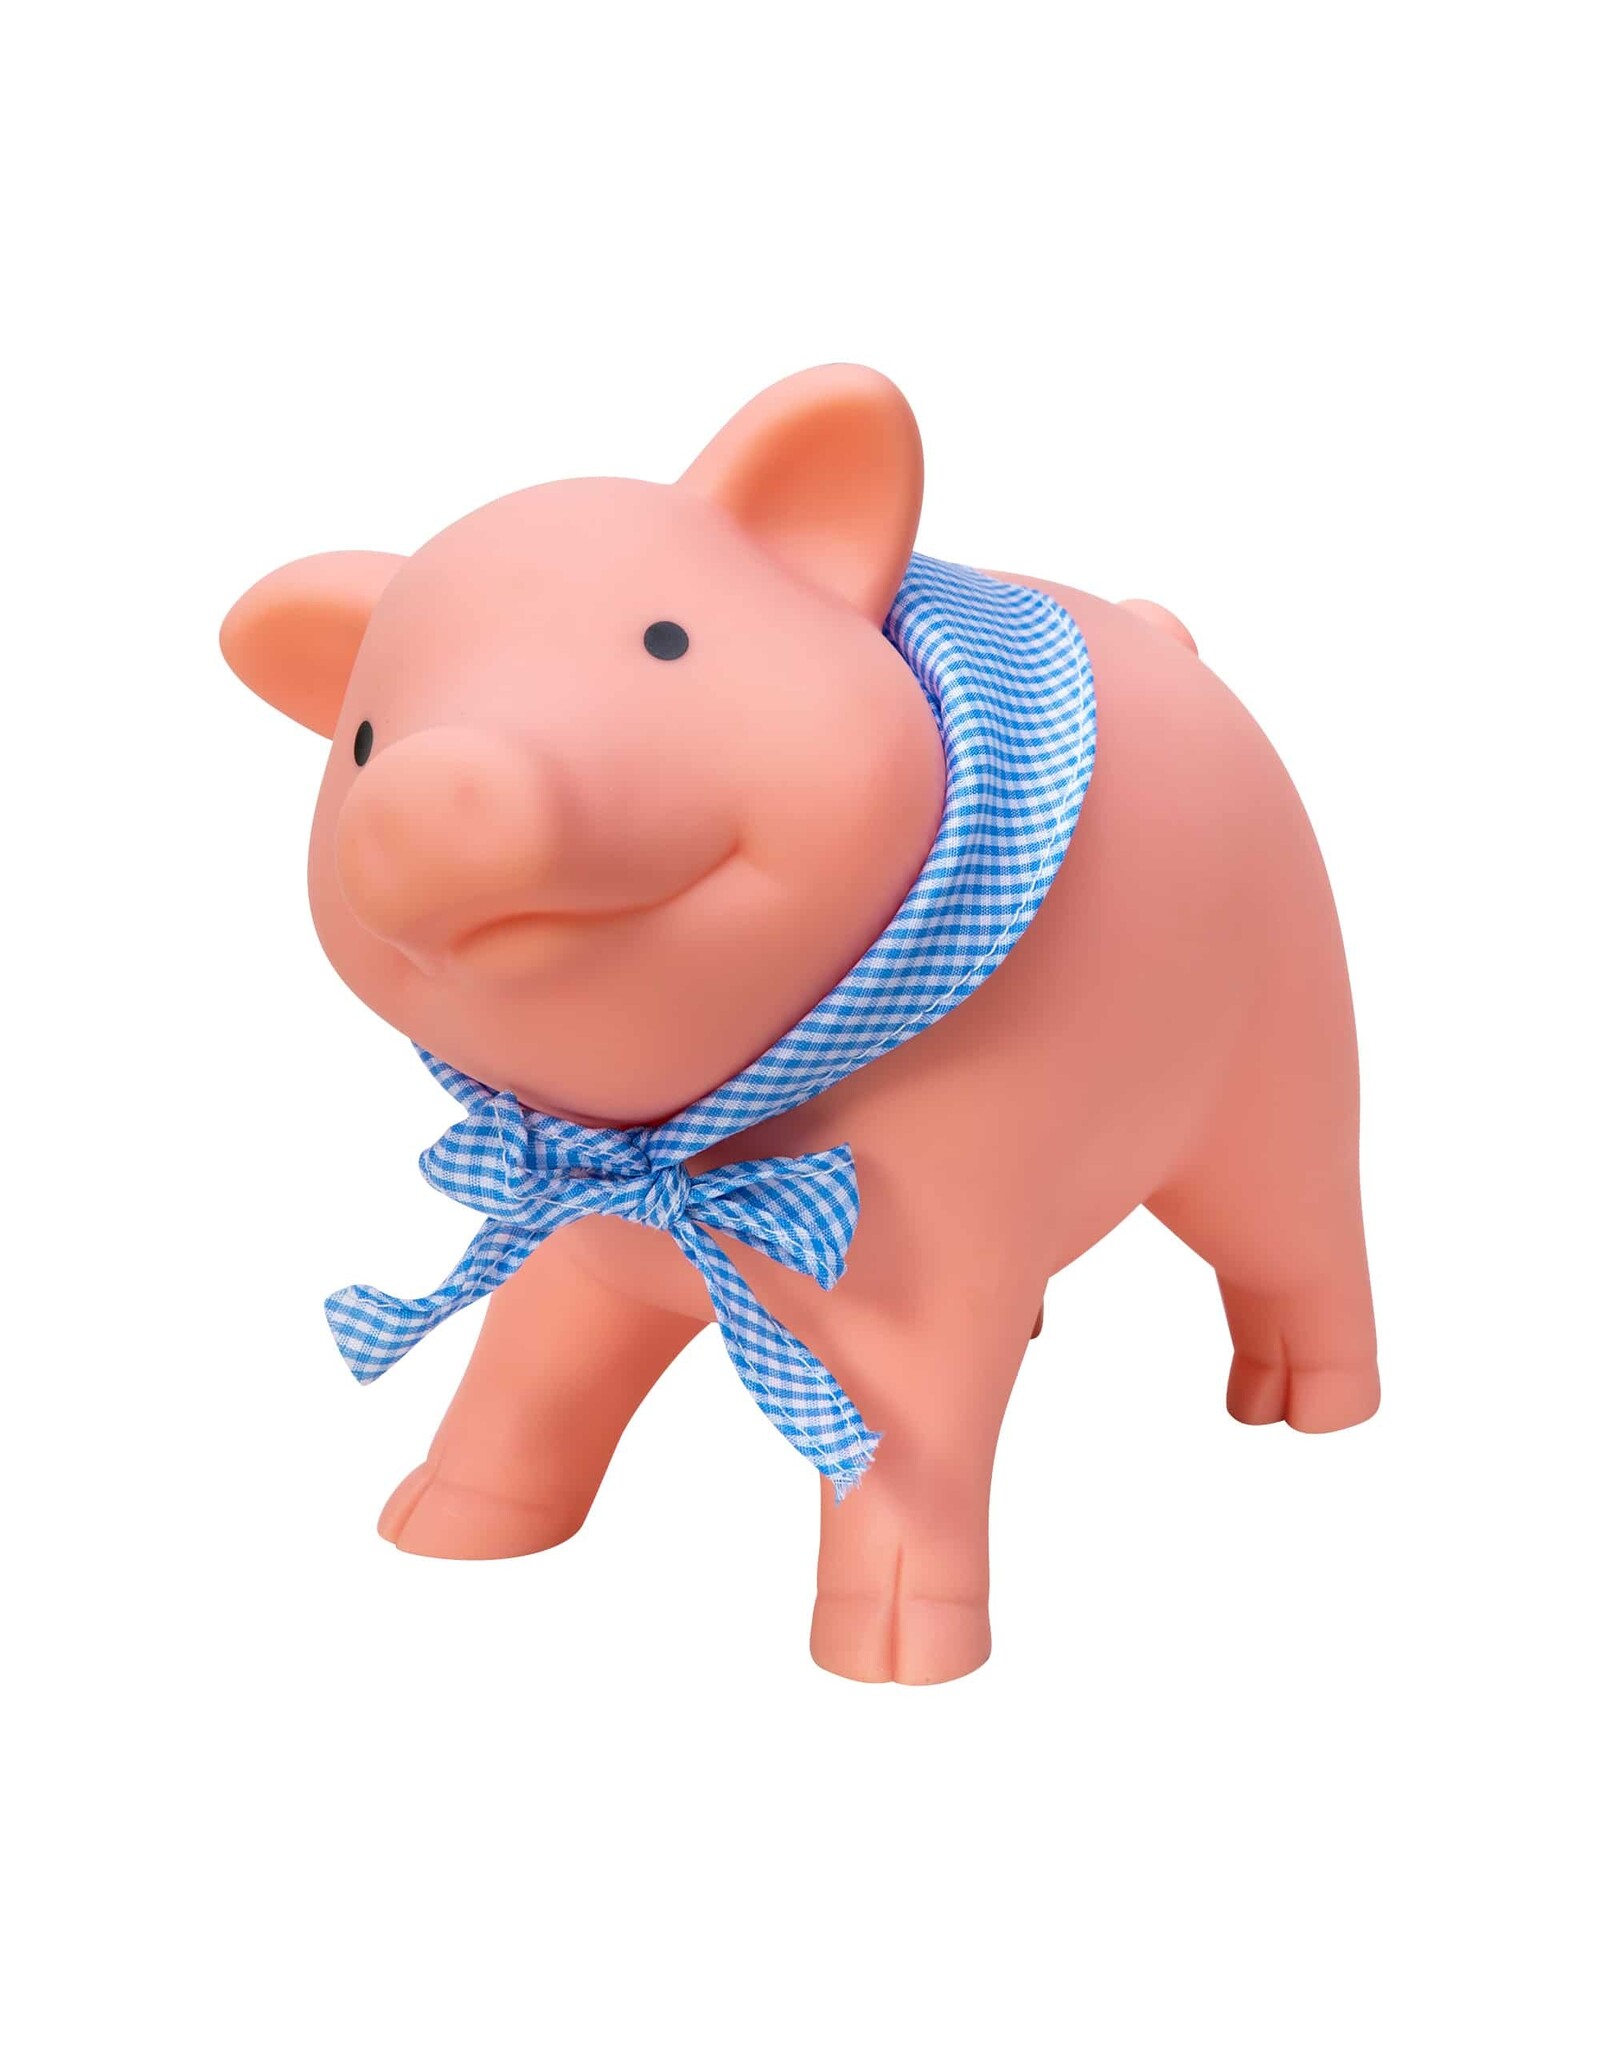 Schylling Penny the Pig Rubber Piggy Bank